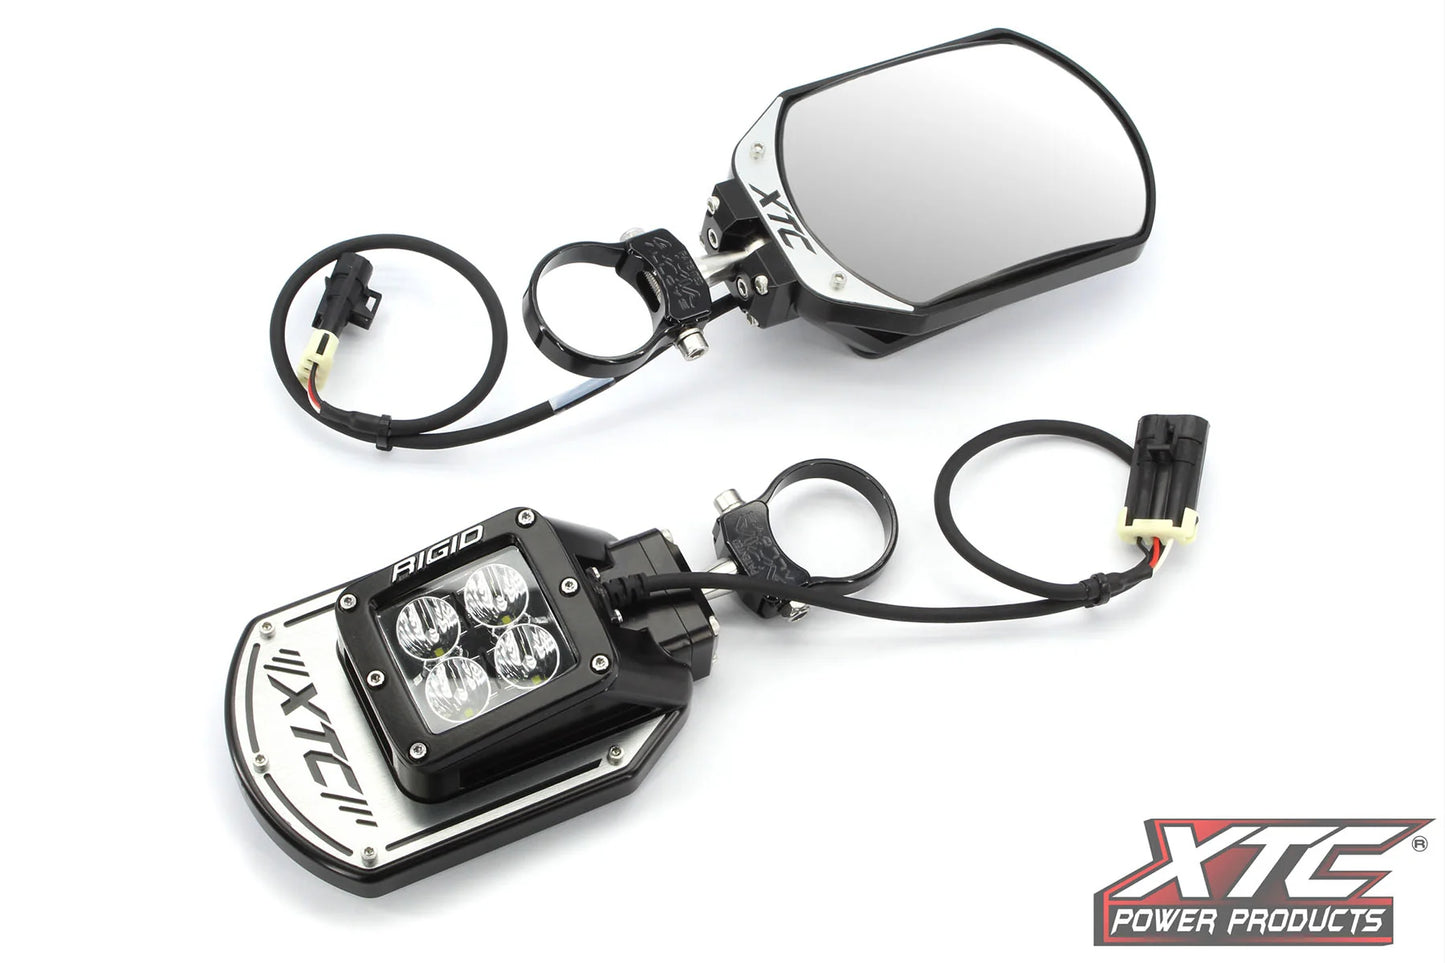 TMW OFF-ROAD- XTC SIX12 Side Mirrors with Amber Light and Rigid Front Light